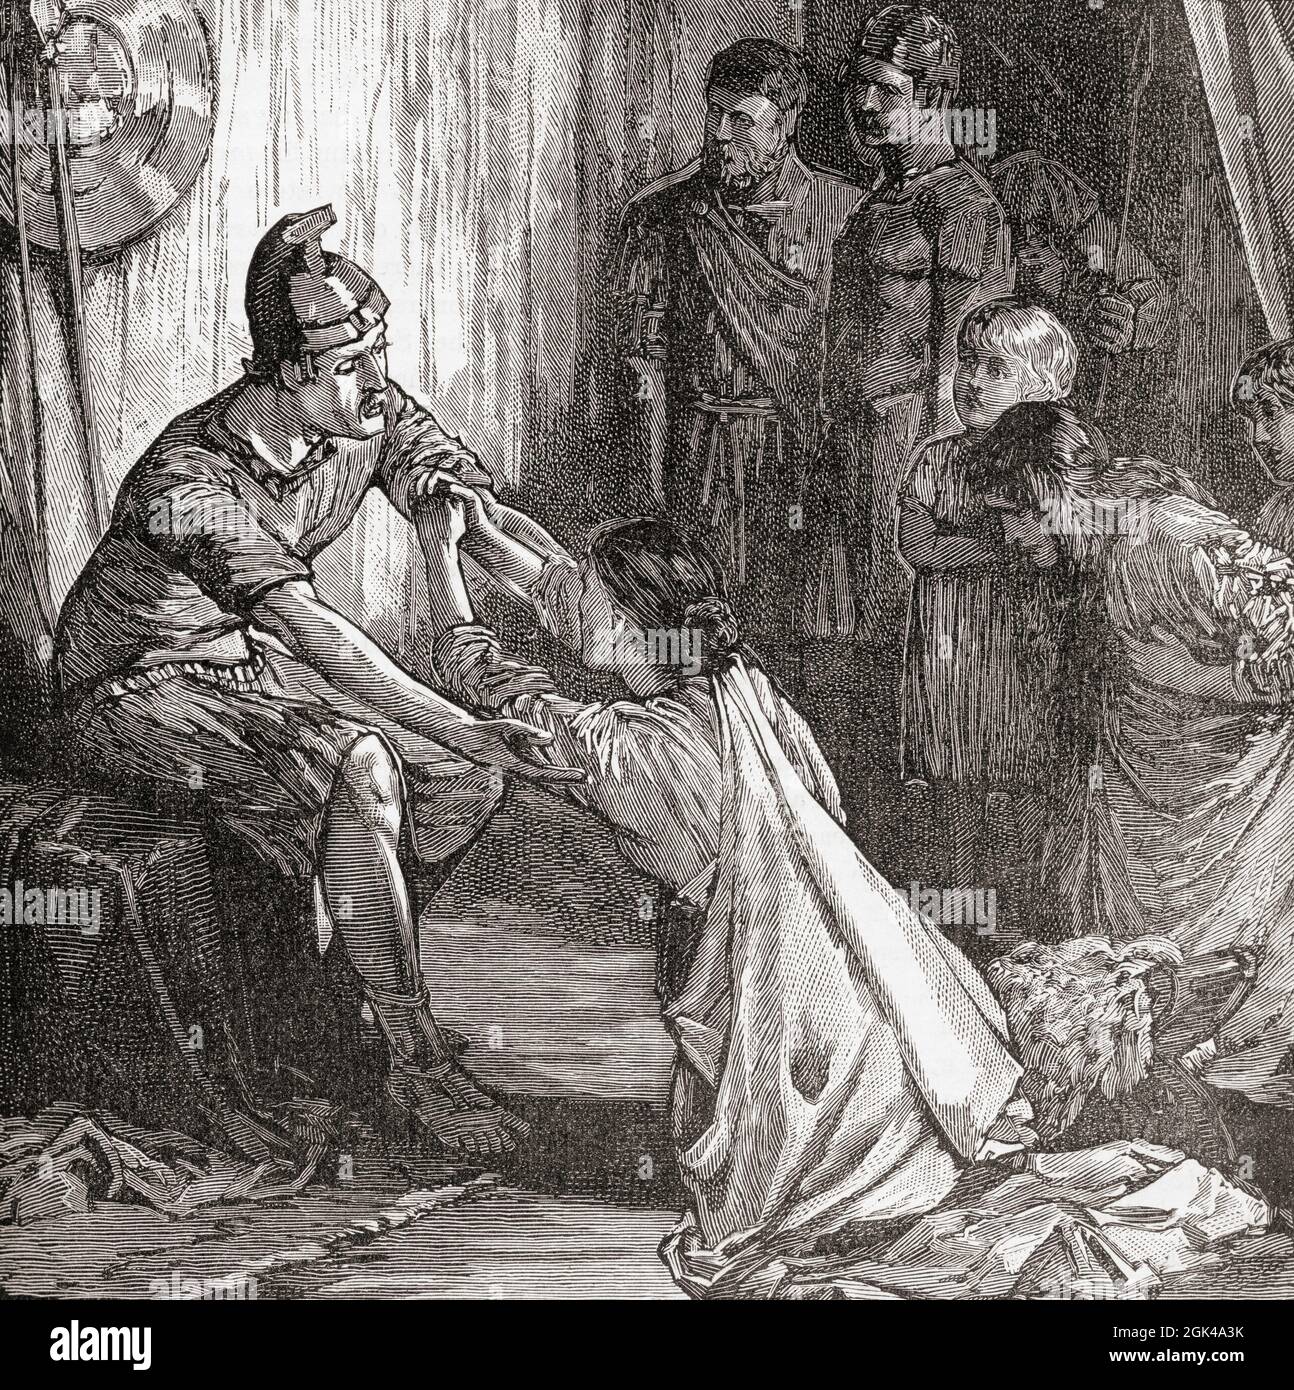 Gnaeus (or Gaius) Marcius Coriolanus, 5th century BC Roman general.  Coriolanus' mother Veturia and his wife Volumnia  imploring Coriolanus to cease his attack on Rome, listening to their pleas he moved the Volscian camp back from the city, ending the siege.  From Cassell's Illustrated Universal History, published 1883. Stock Photo